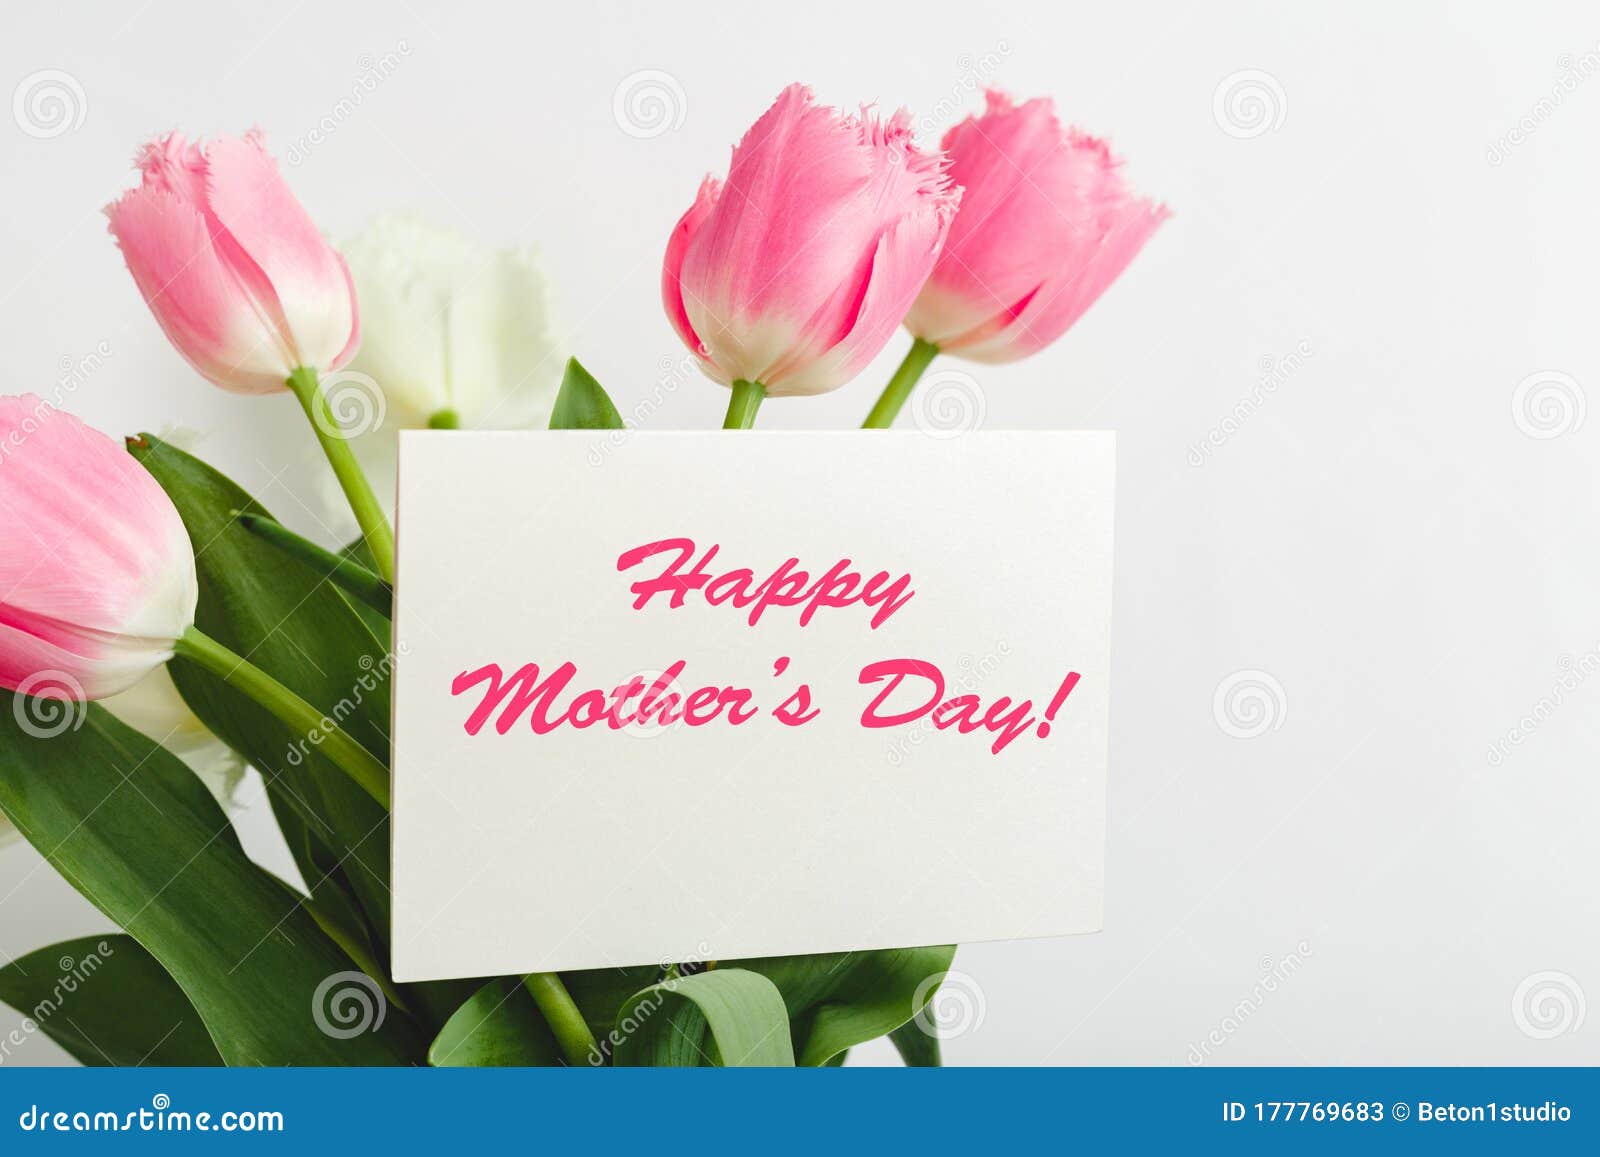 Happy Mothers Day Text On Gift Card In Flower Bouquet On